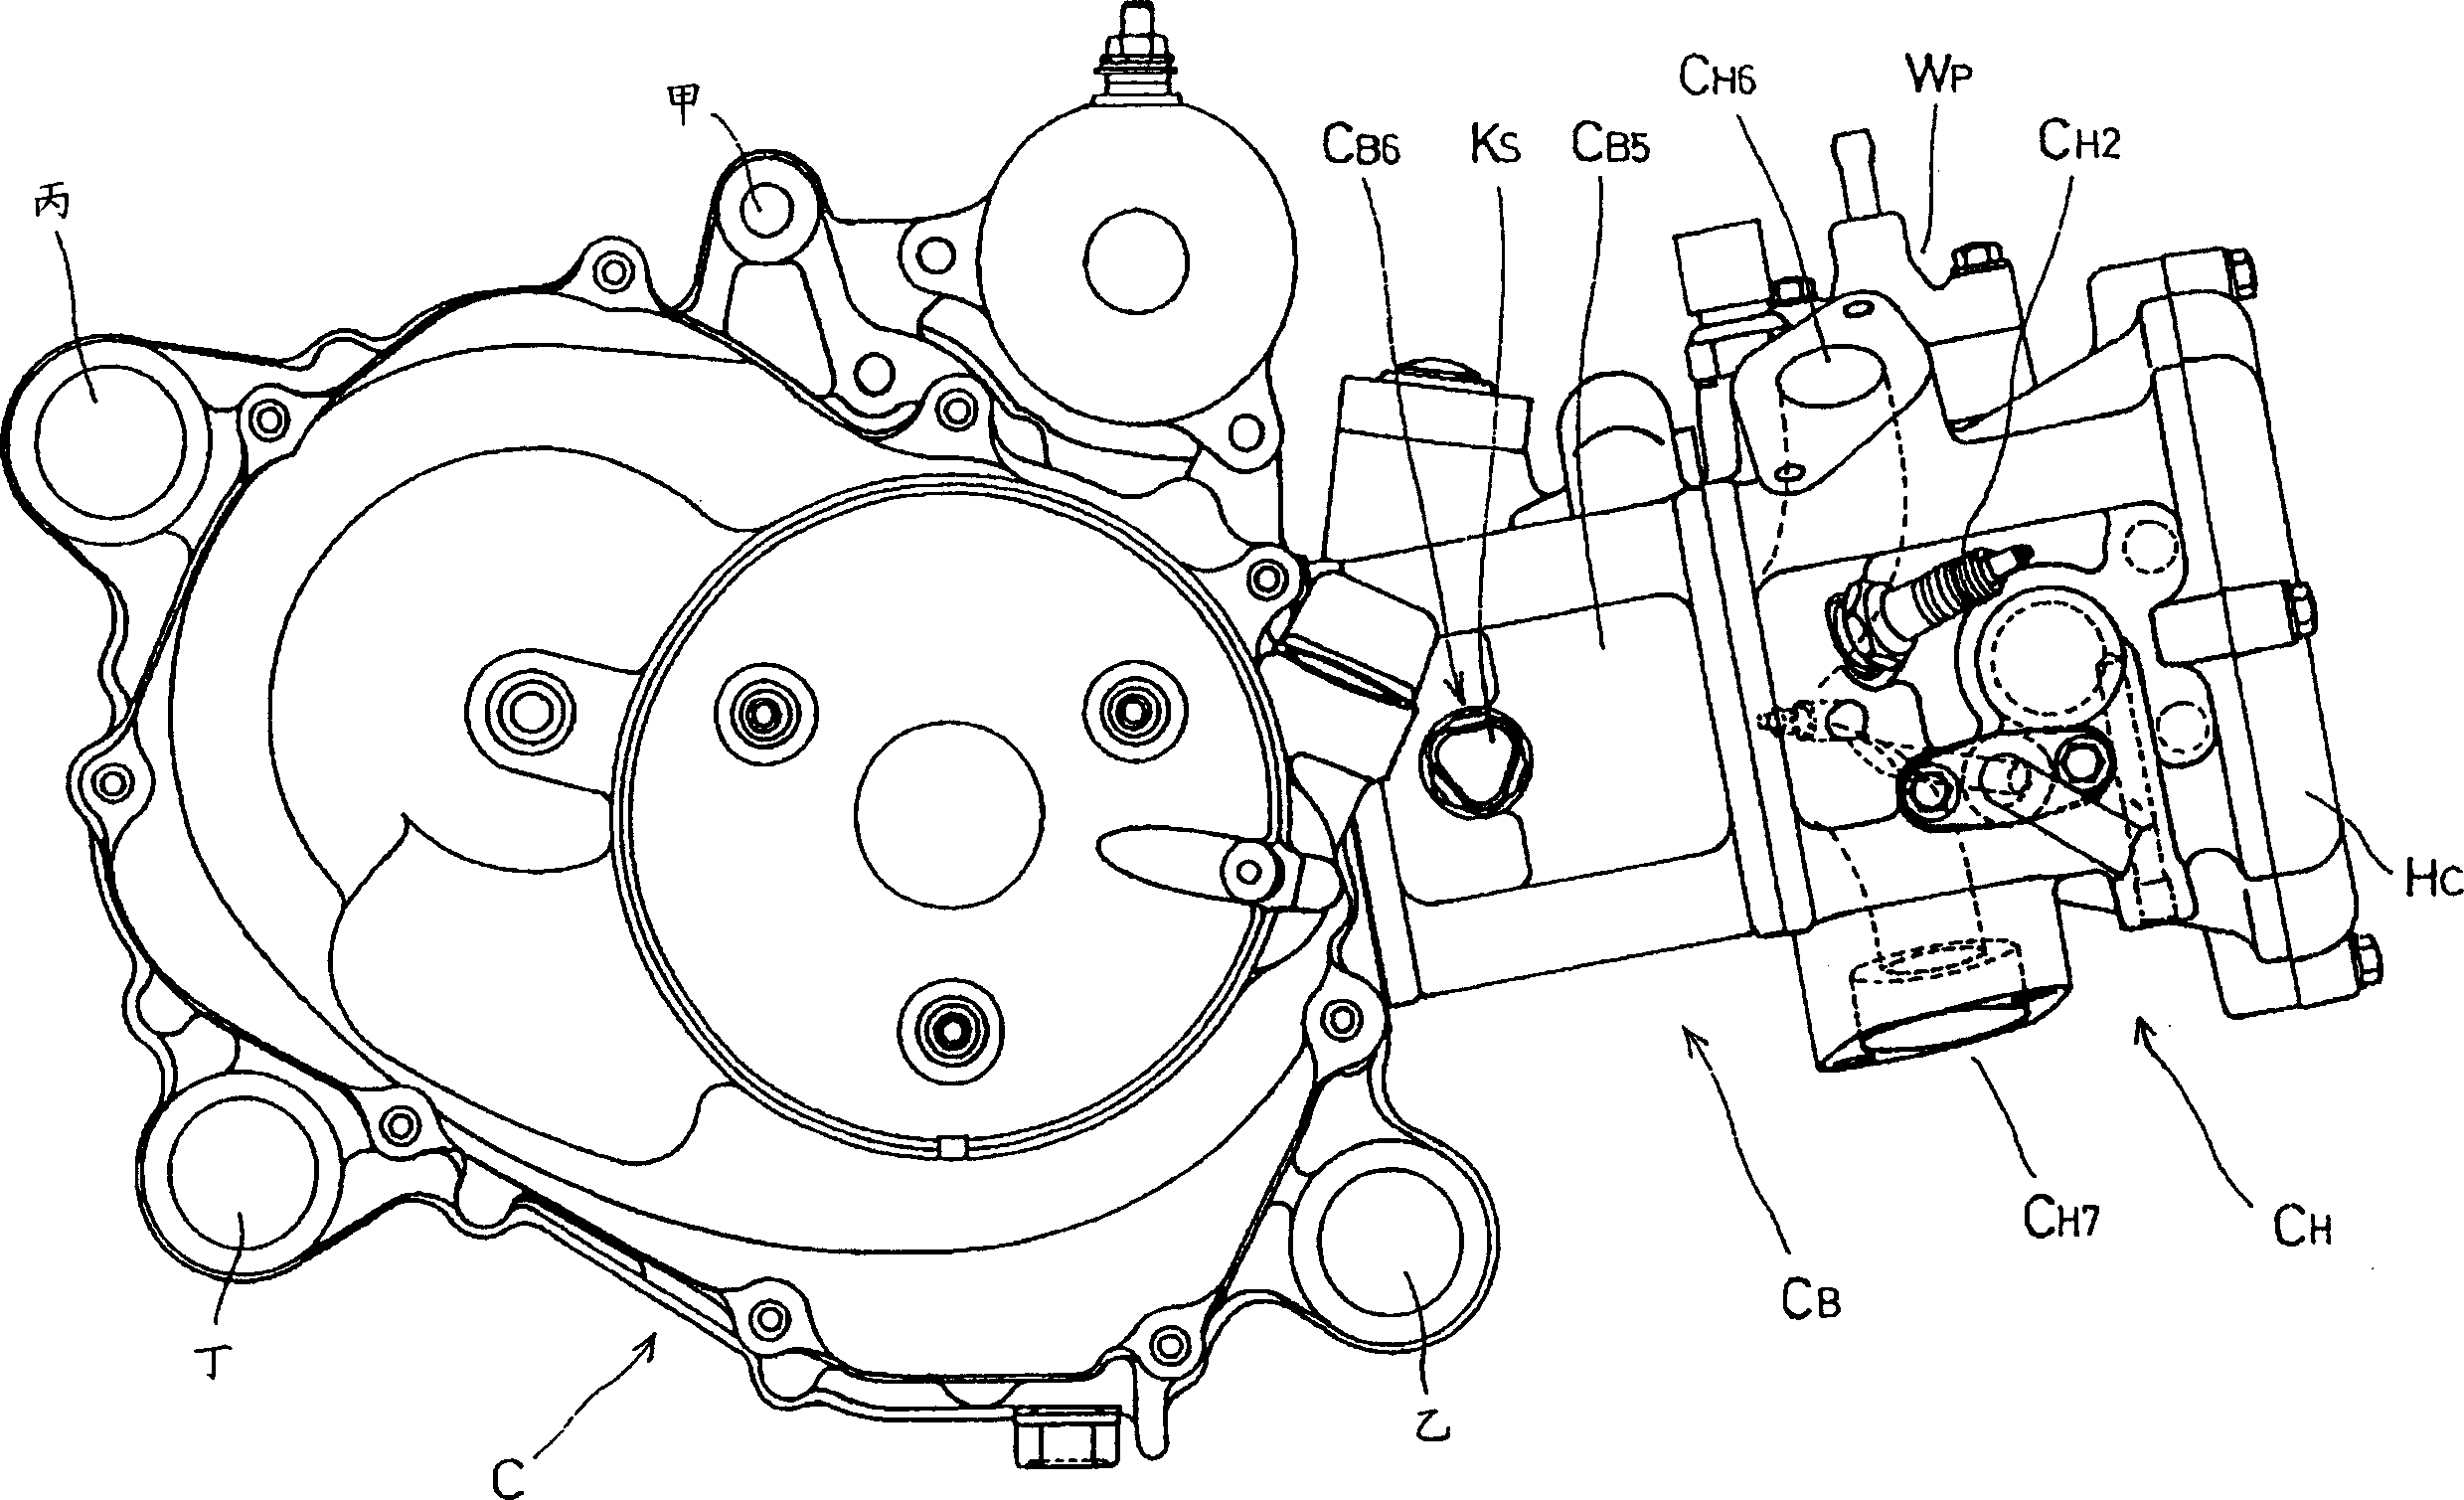 Installation structure of knockmeter in internal combustion engine